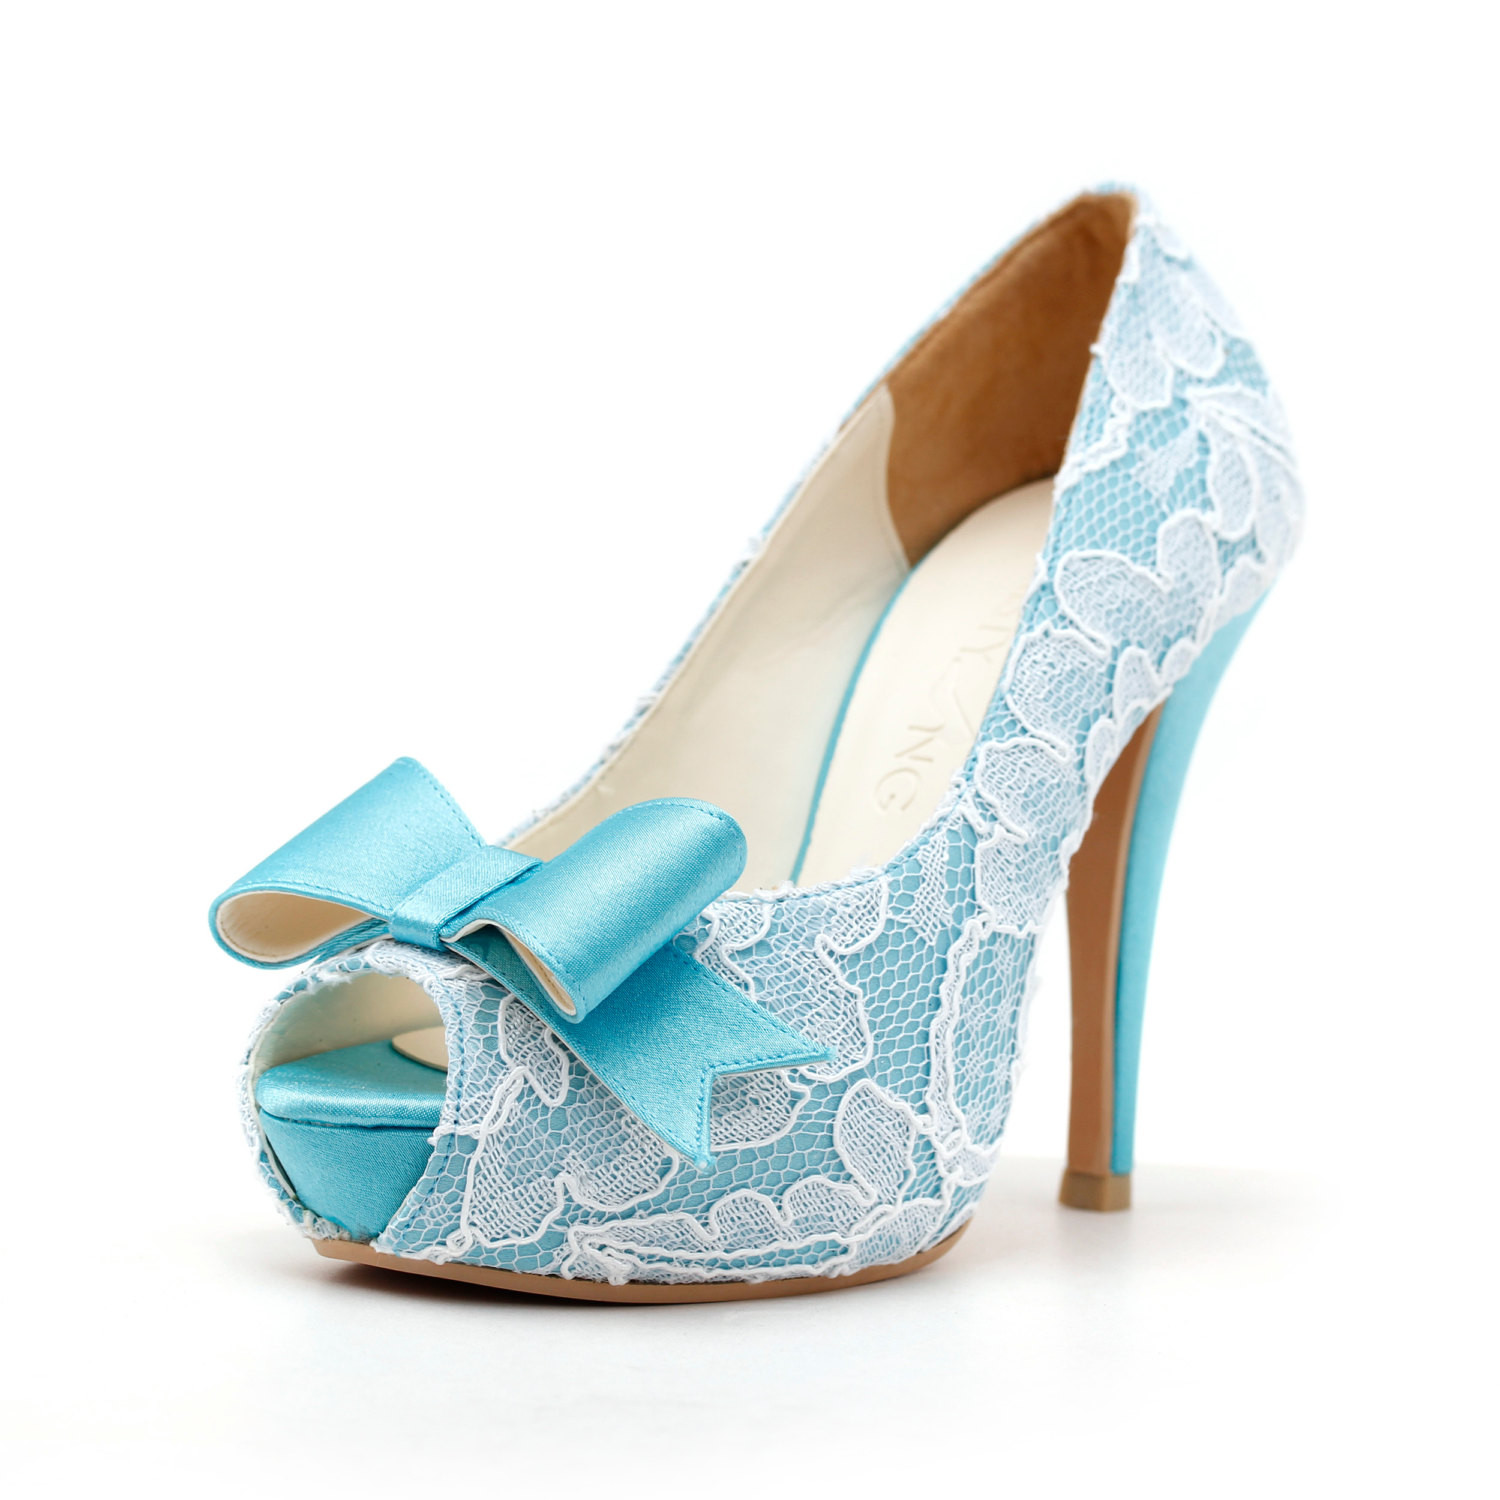 Blue Shoes Wedding
 Wedding Shoes For The Modern Day Bride